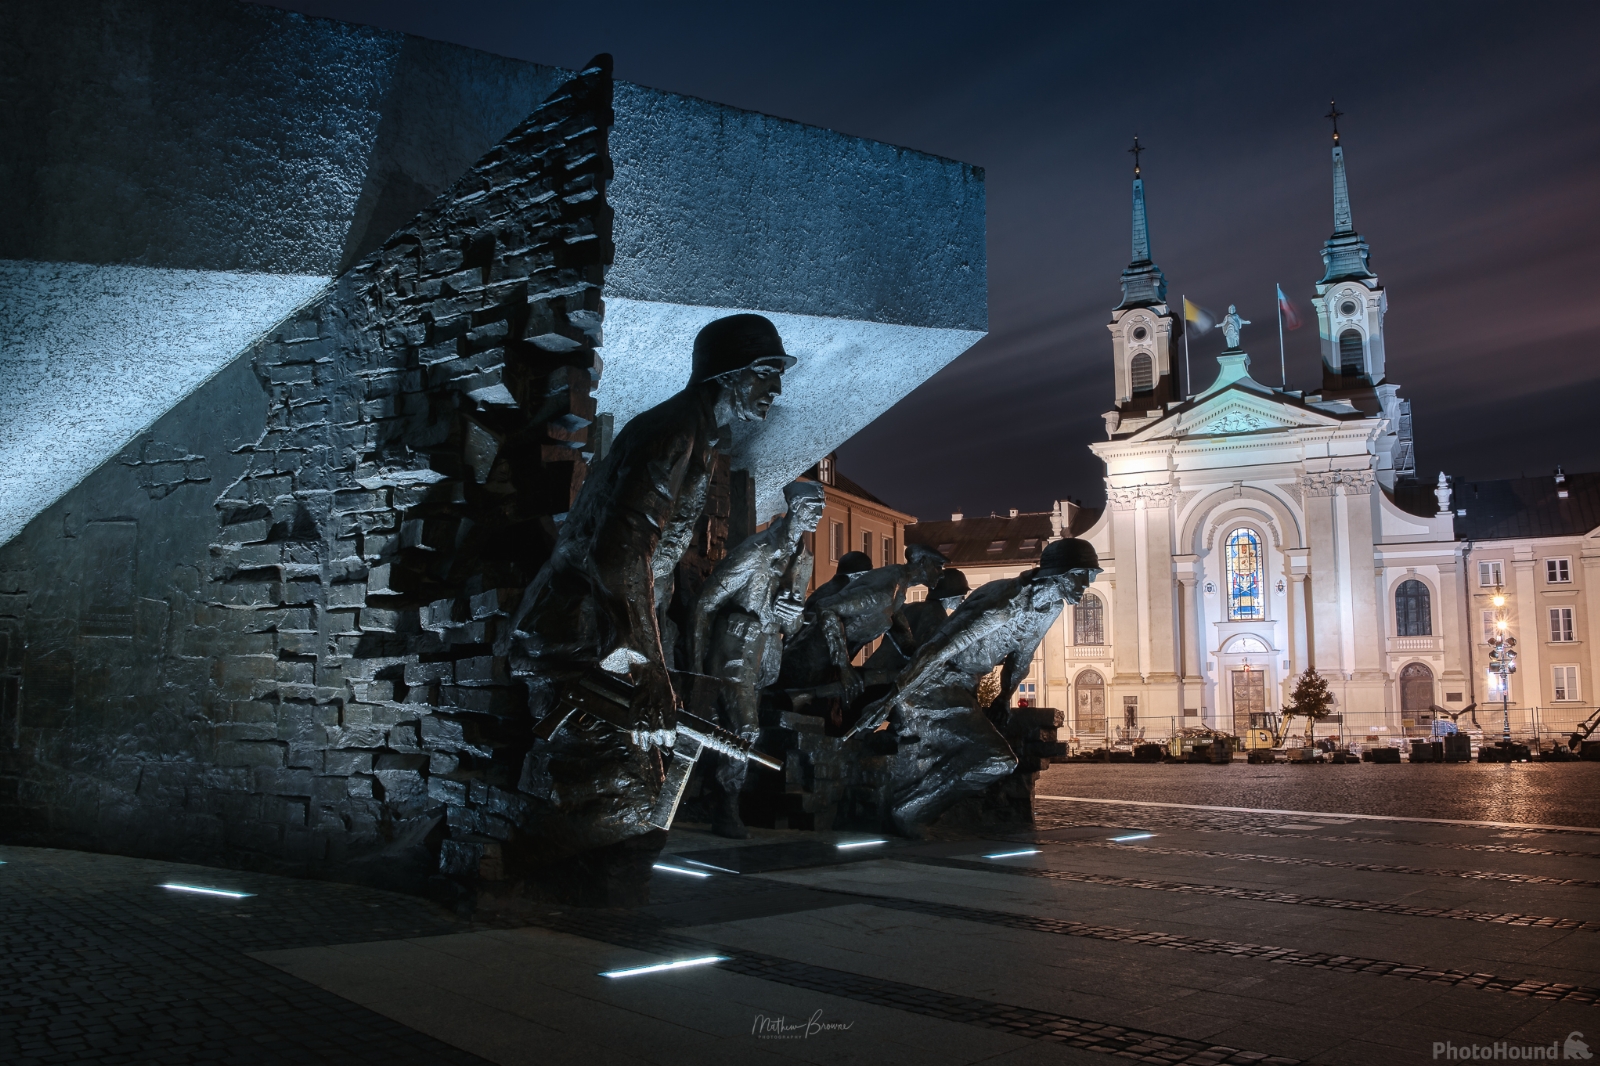 Image of Warsaw Uprising Monument by Mathew Browne